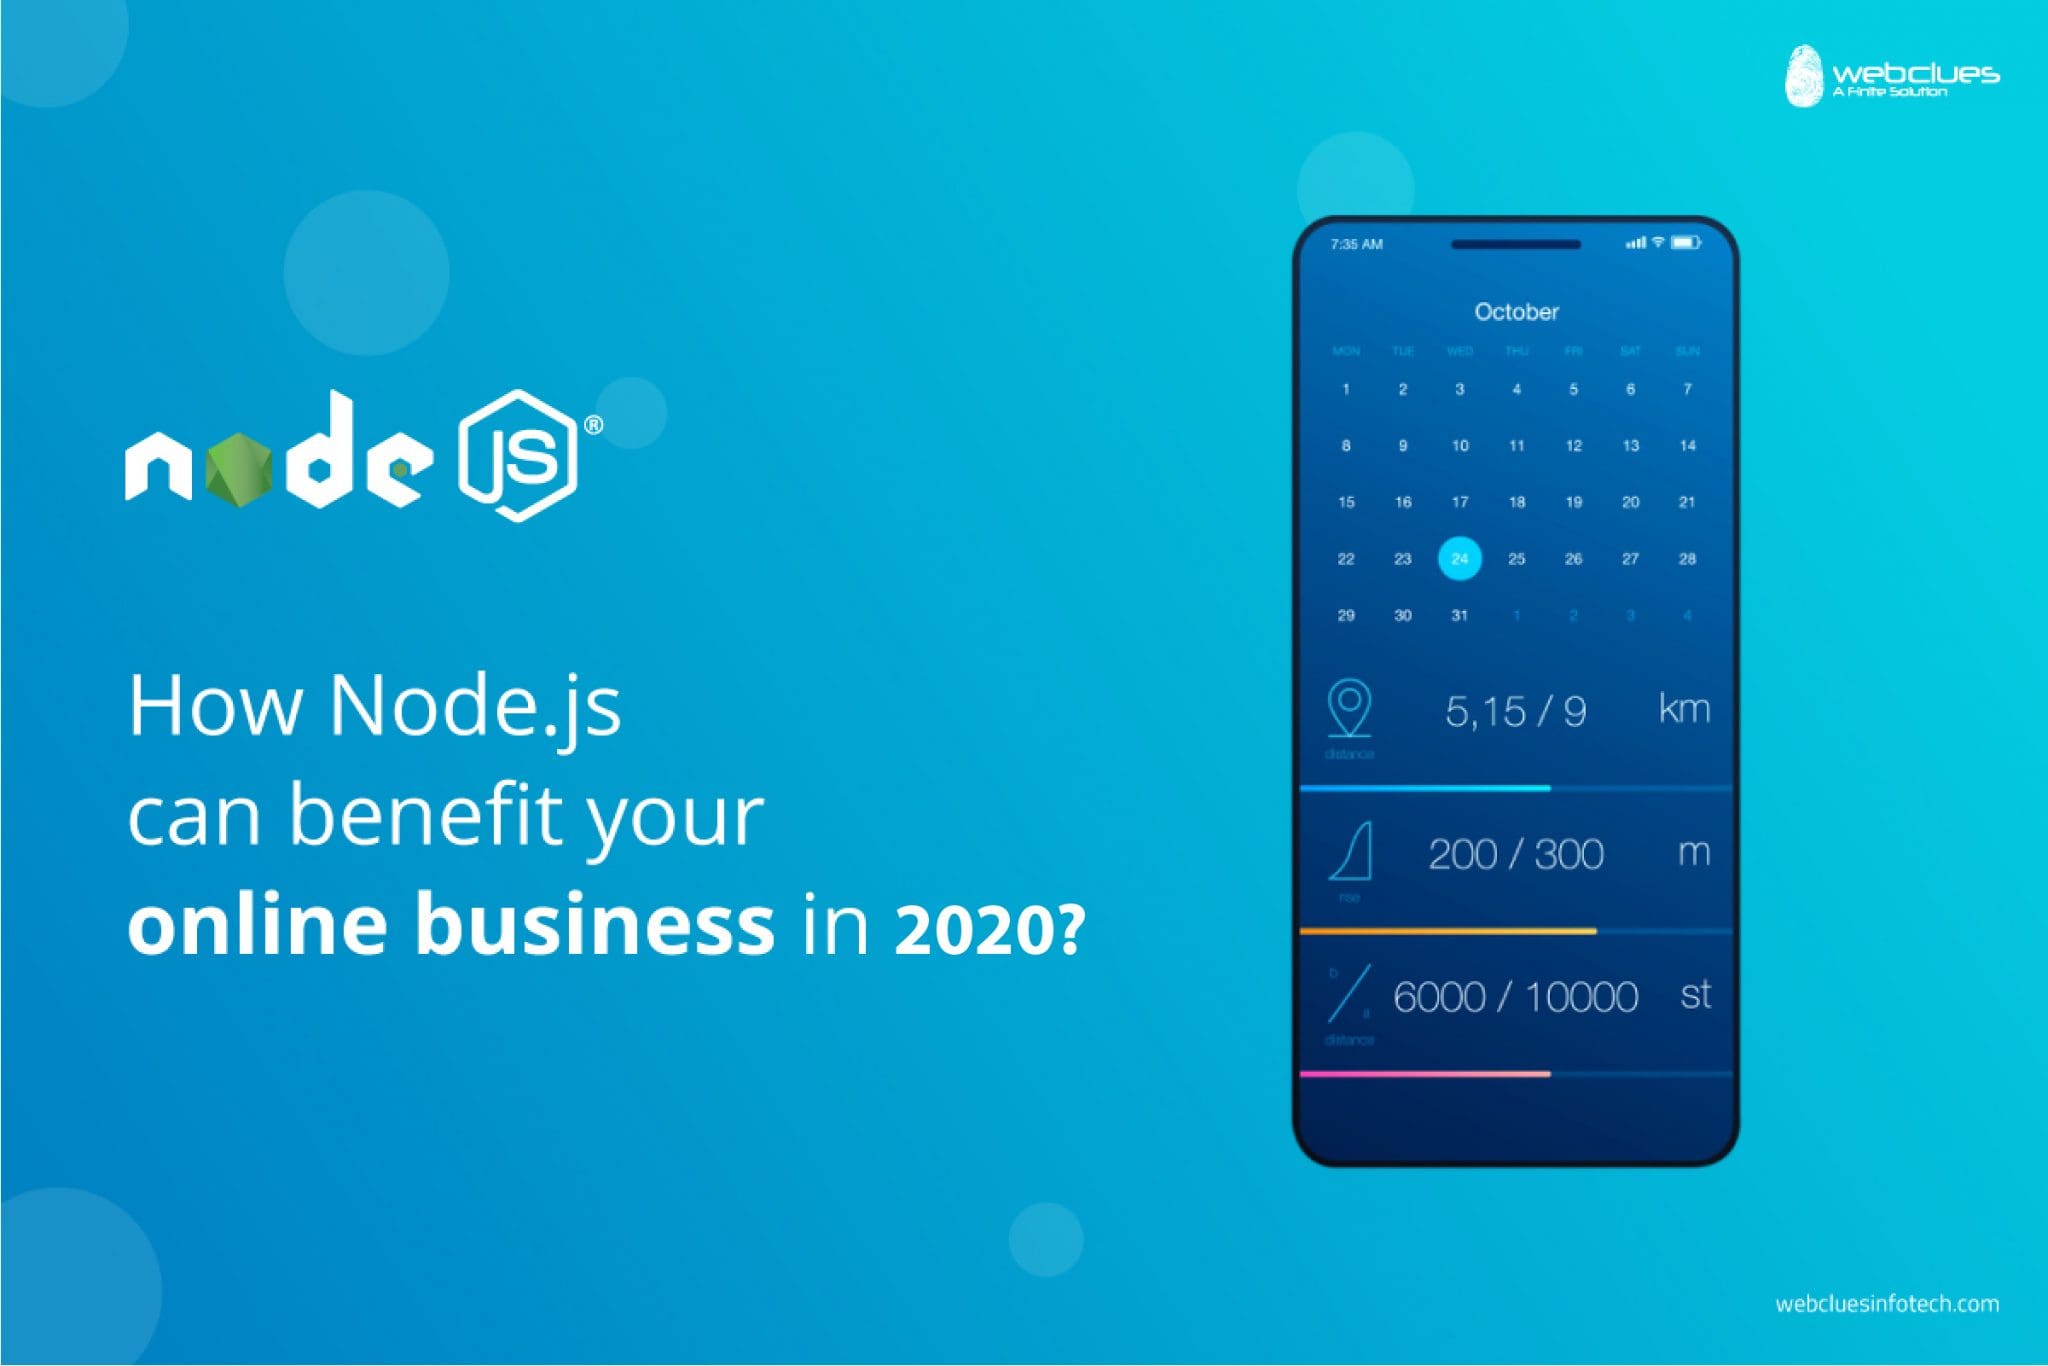 How Node.js can benefit your online business in 2020